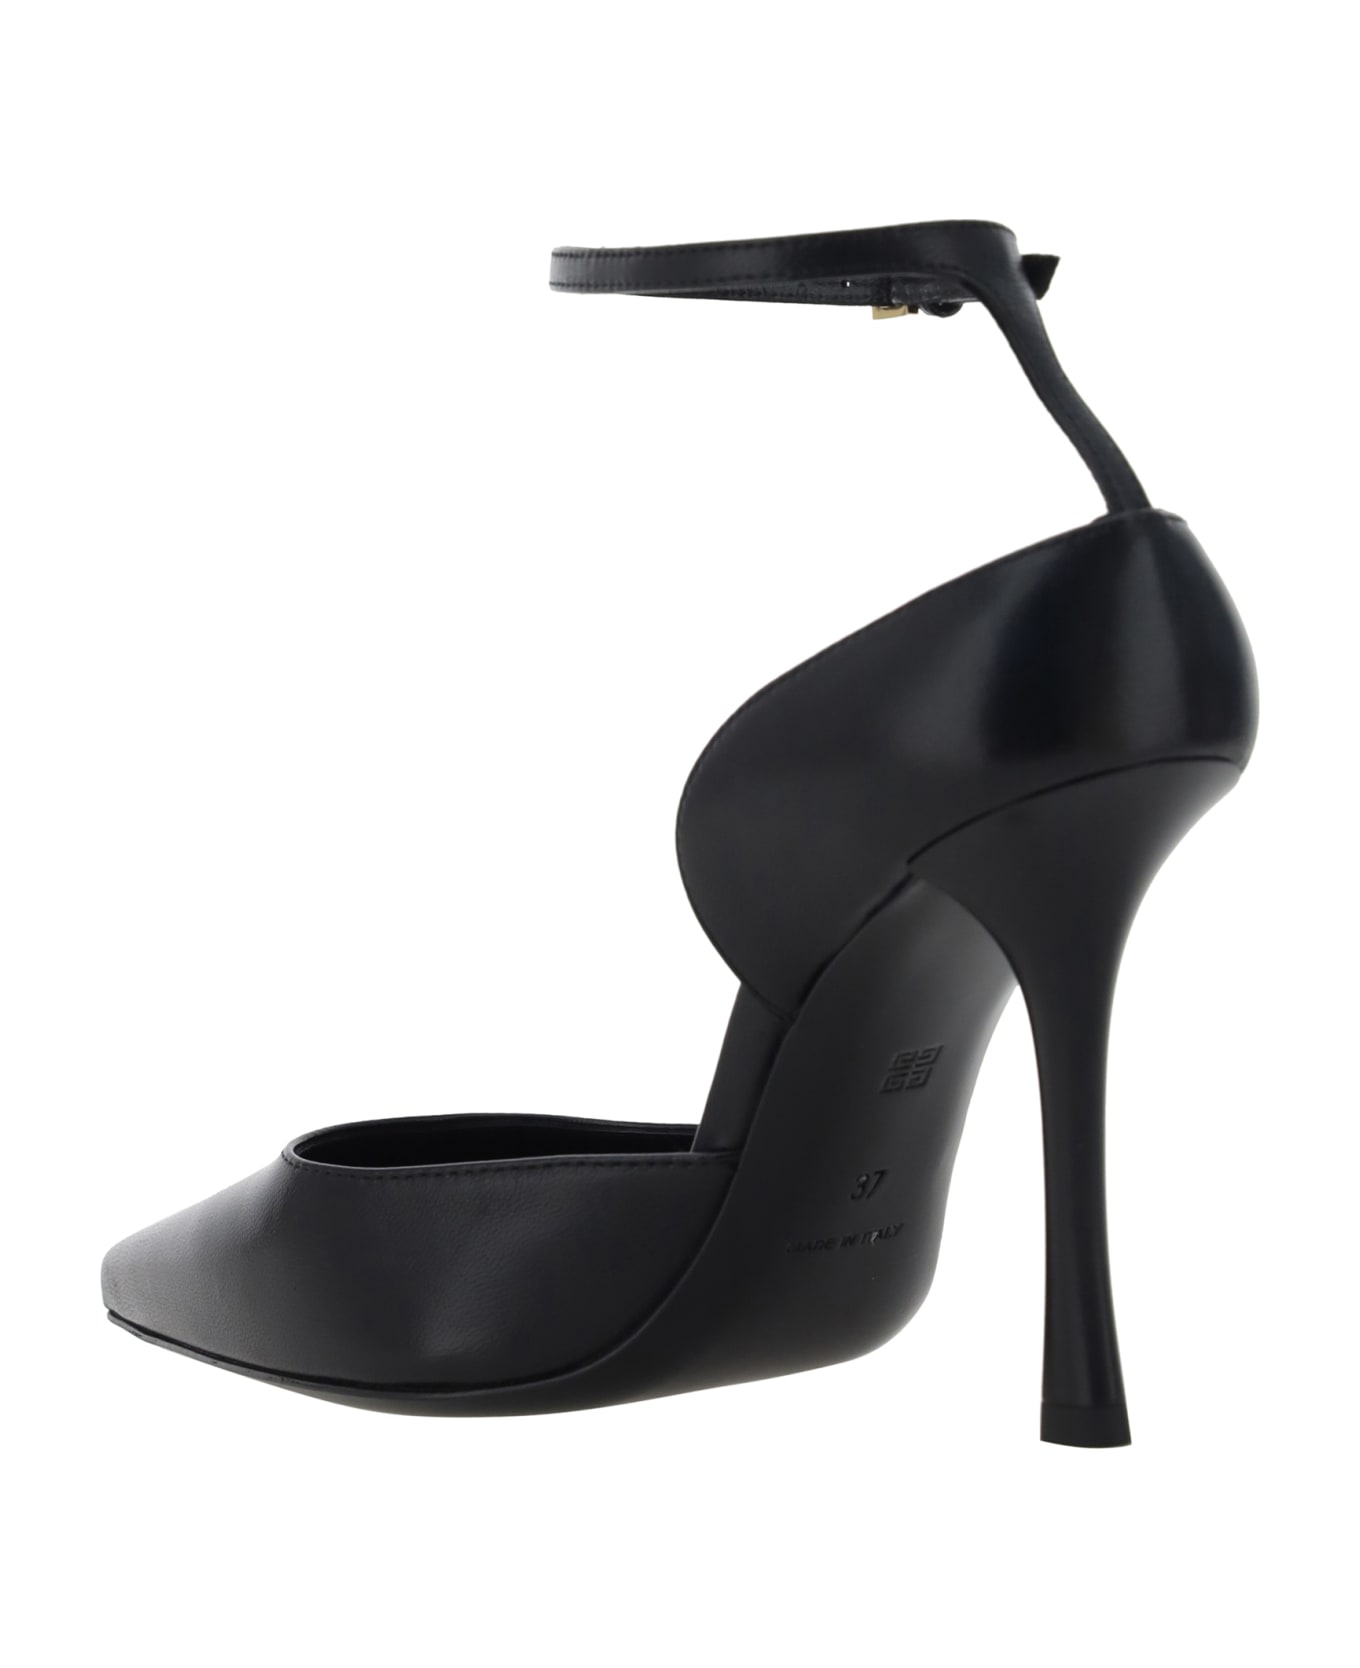 Givenchy Show Stocking Pumps - Black